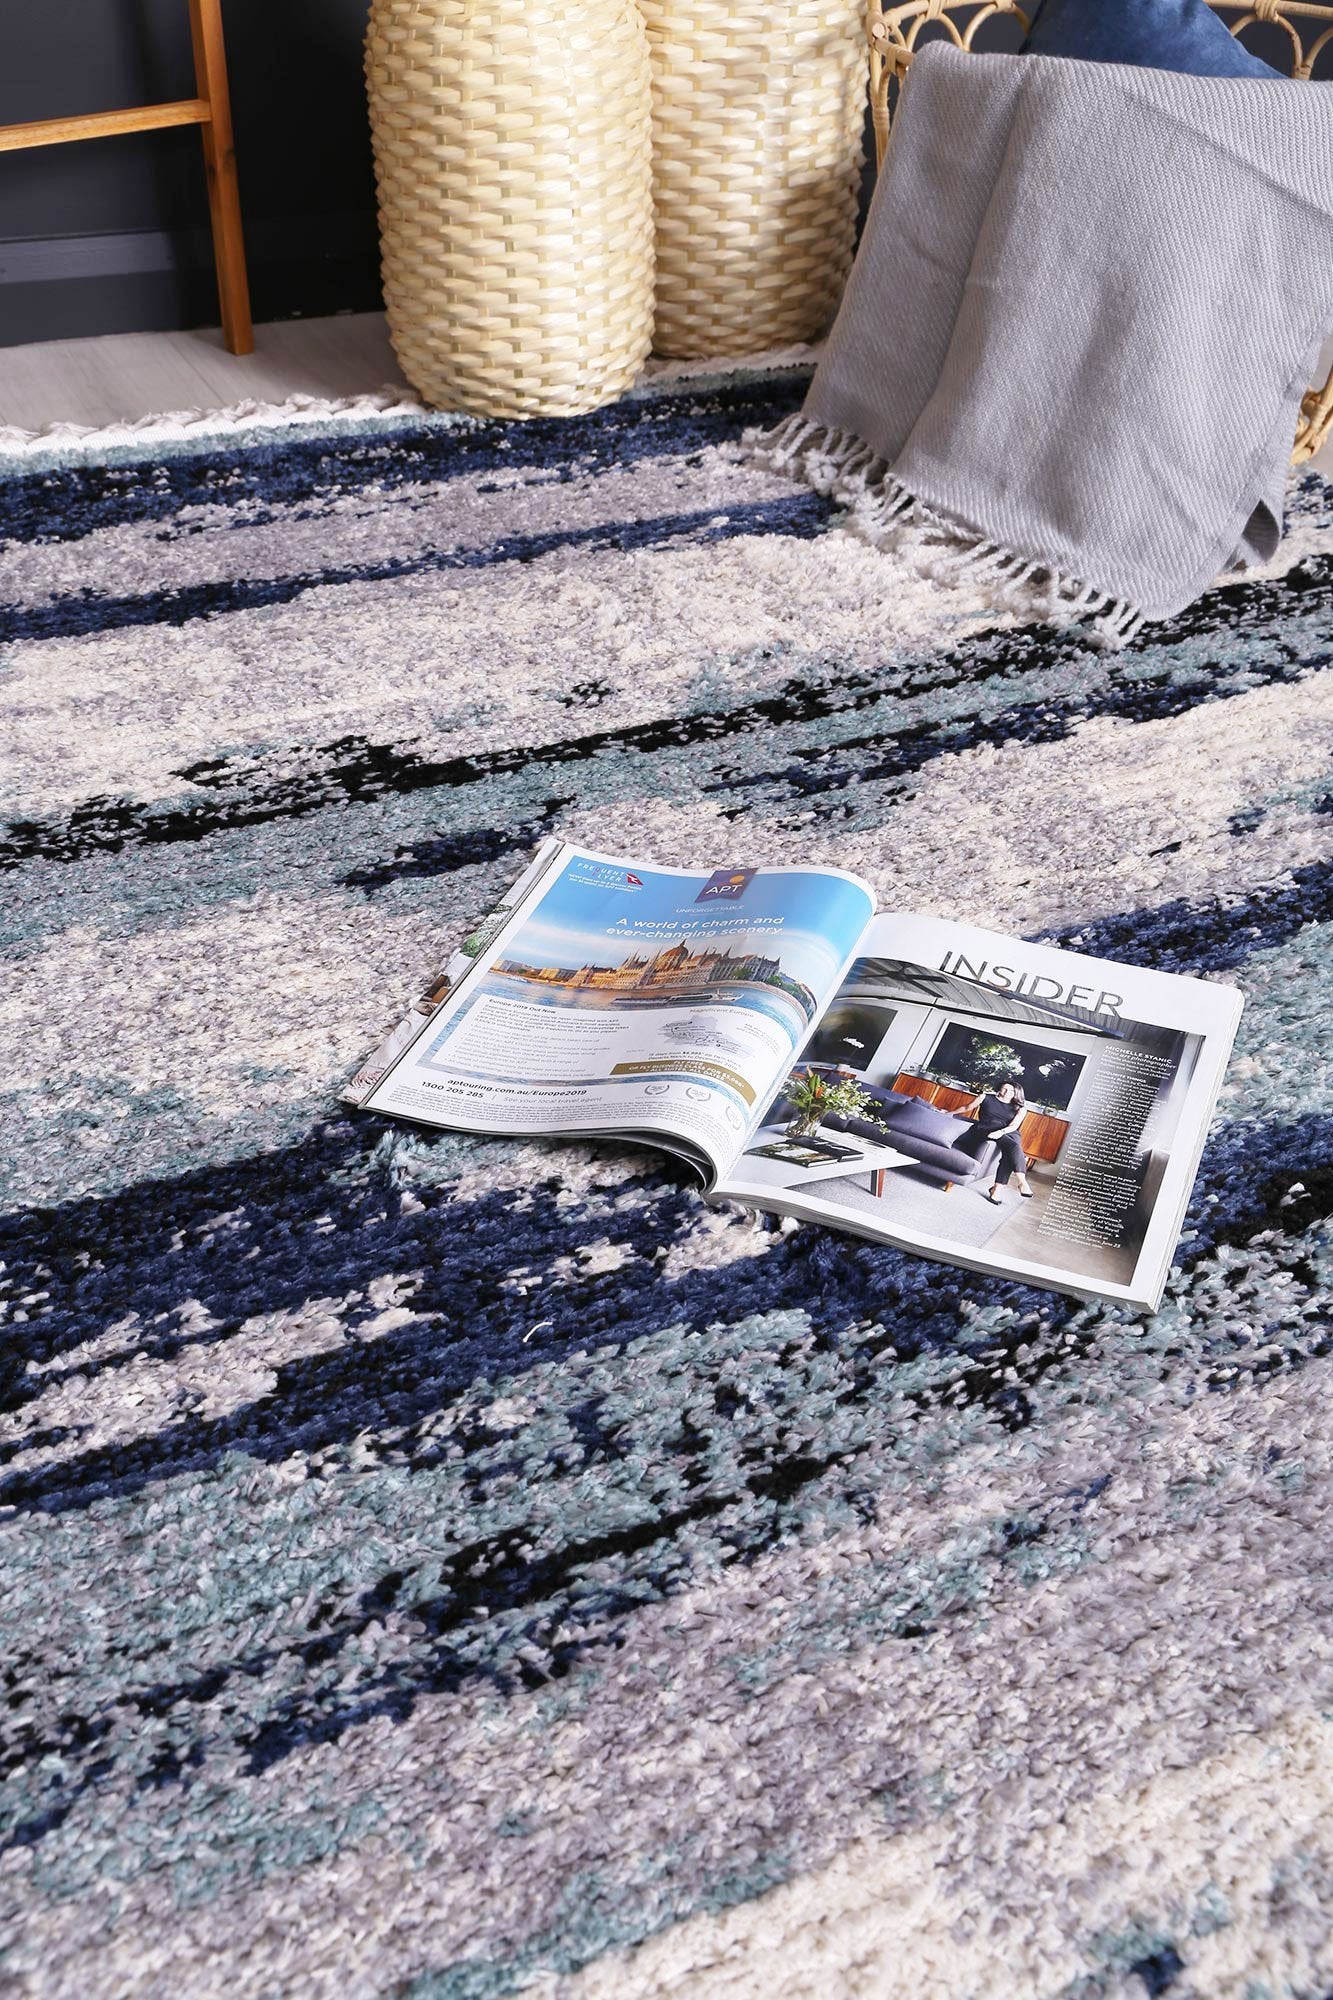 Mansour Navy Blue Abstract Rug